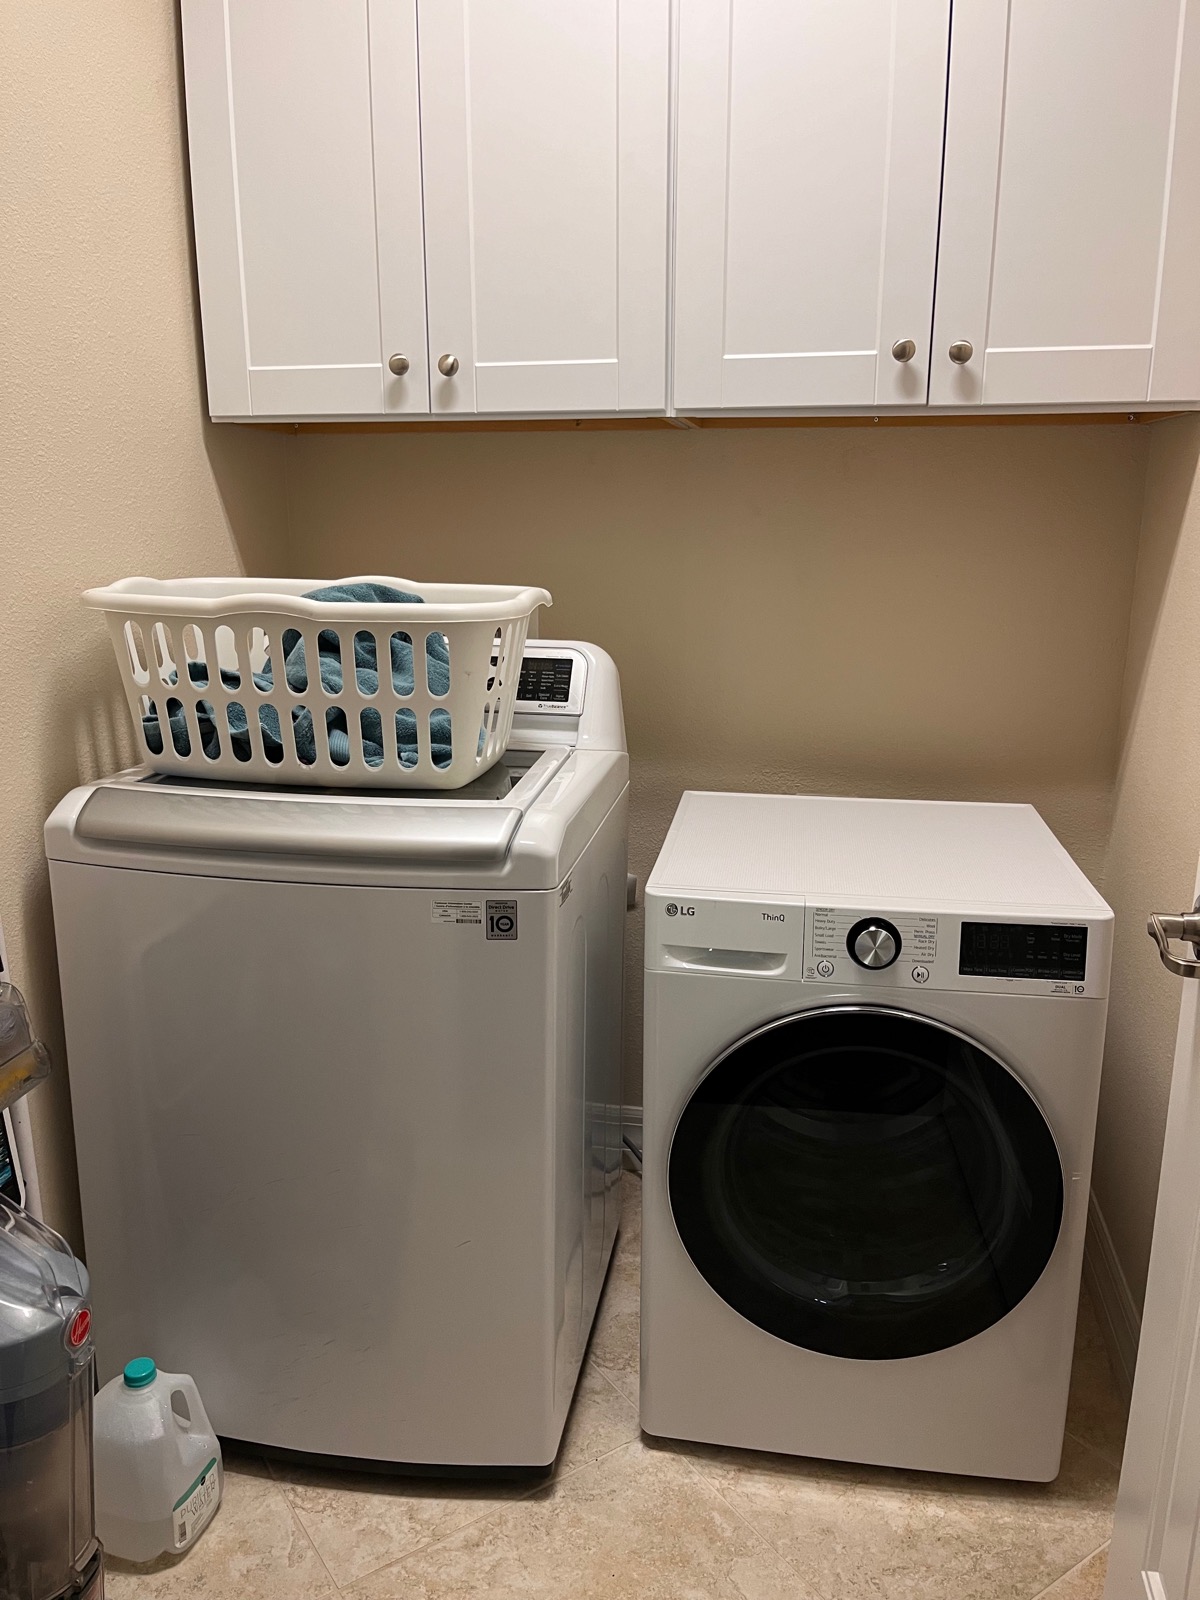 LG ventless dryer 4.2 cubic feet on the right.